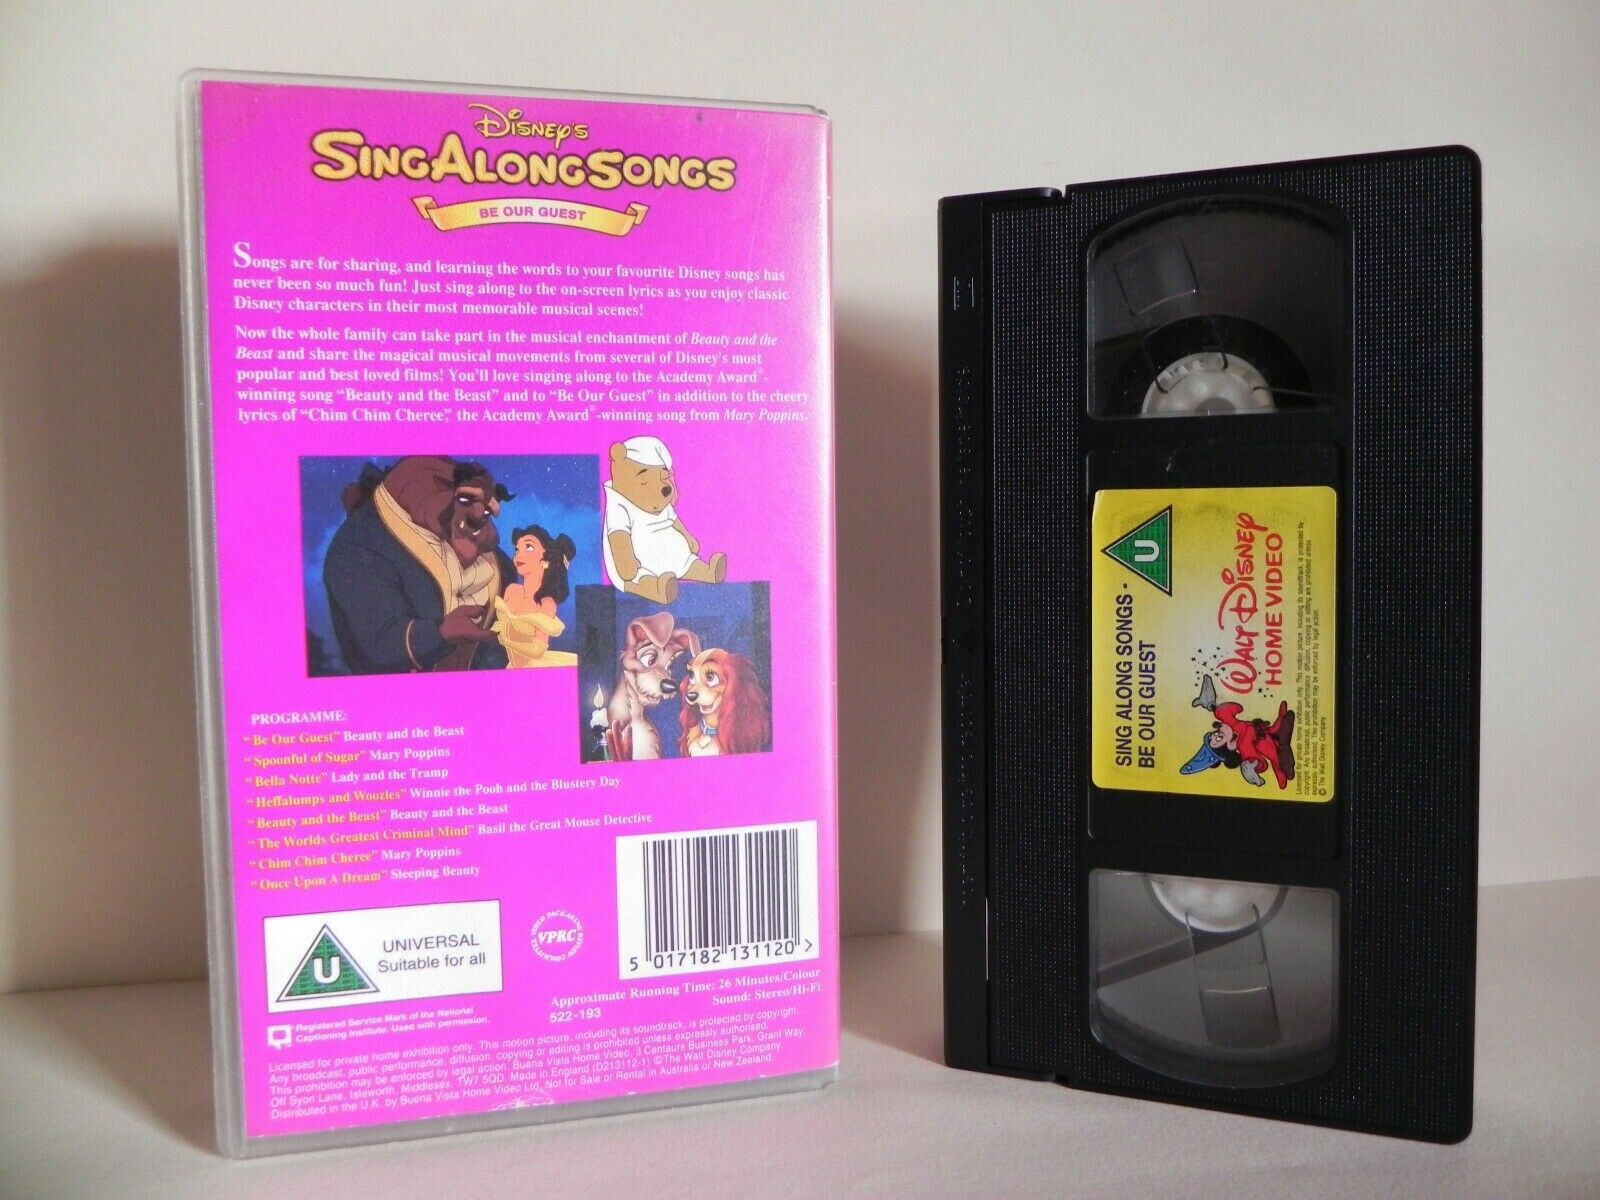 Disney's Sing Along Songs - Be Our Guest - Magical Musical Fun - Kids Vol 8 VHS-